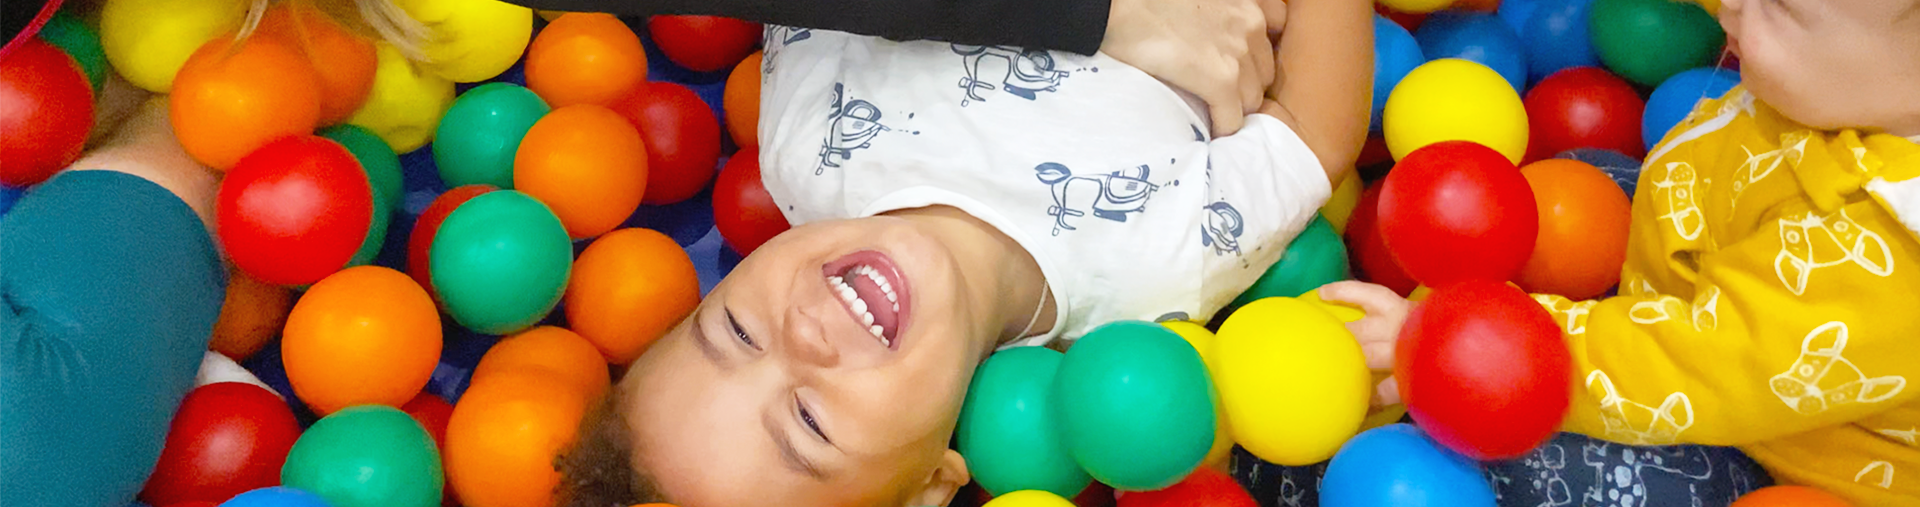 Little boy playing in ball pit 